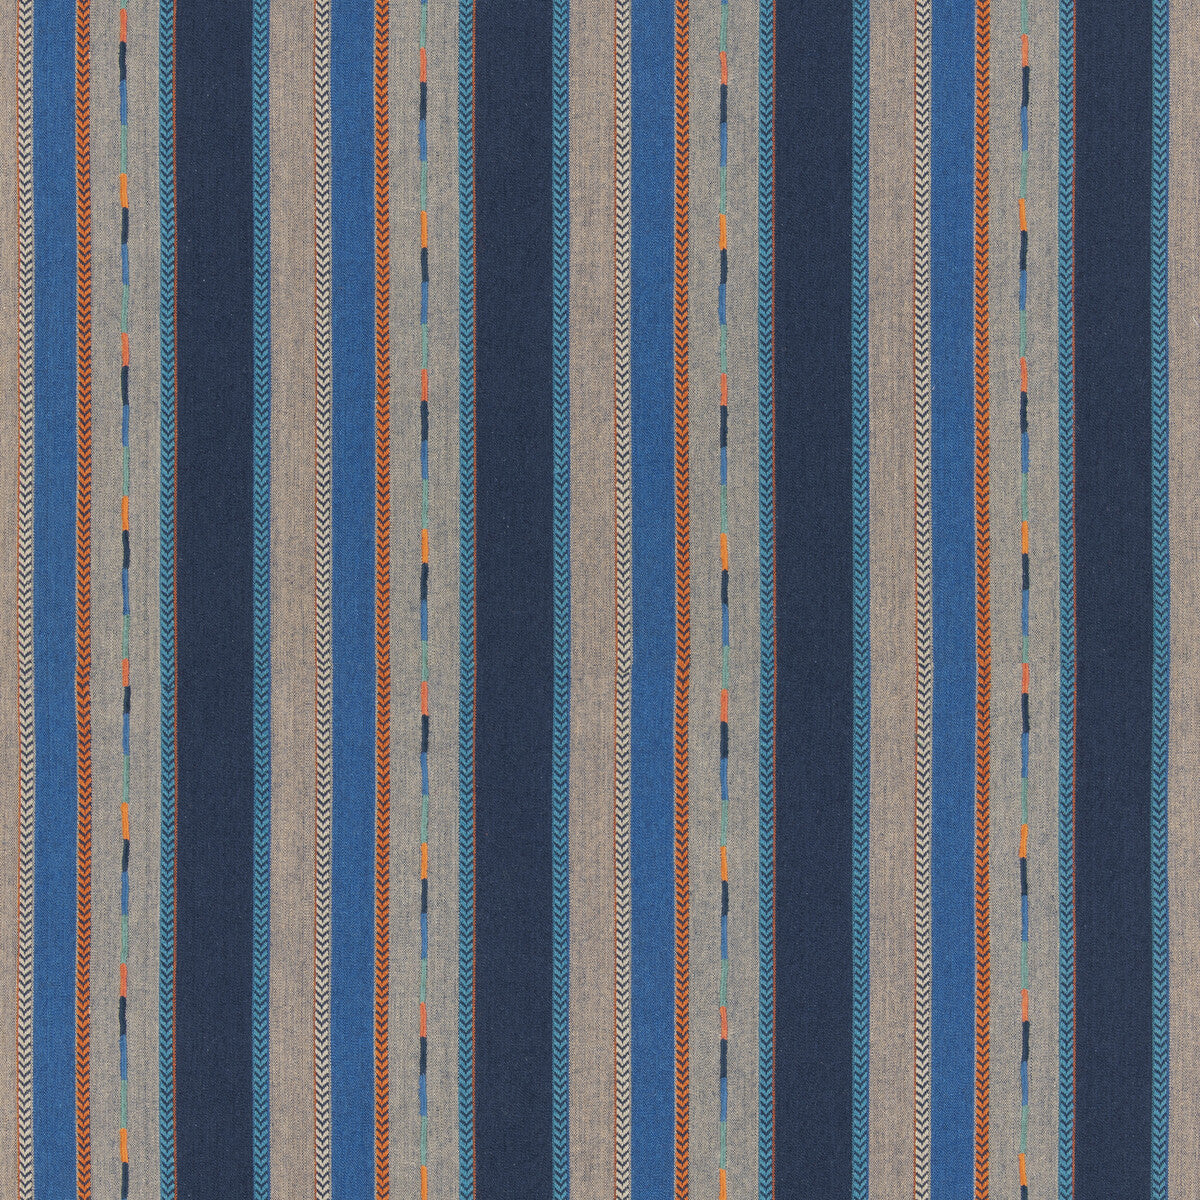 Bunty fabric in indigo color - pattern BF11062.2.0 - by G P &amp; J Baker in the X Kit Kemp Stripes collection